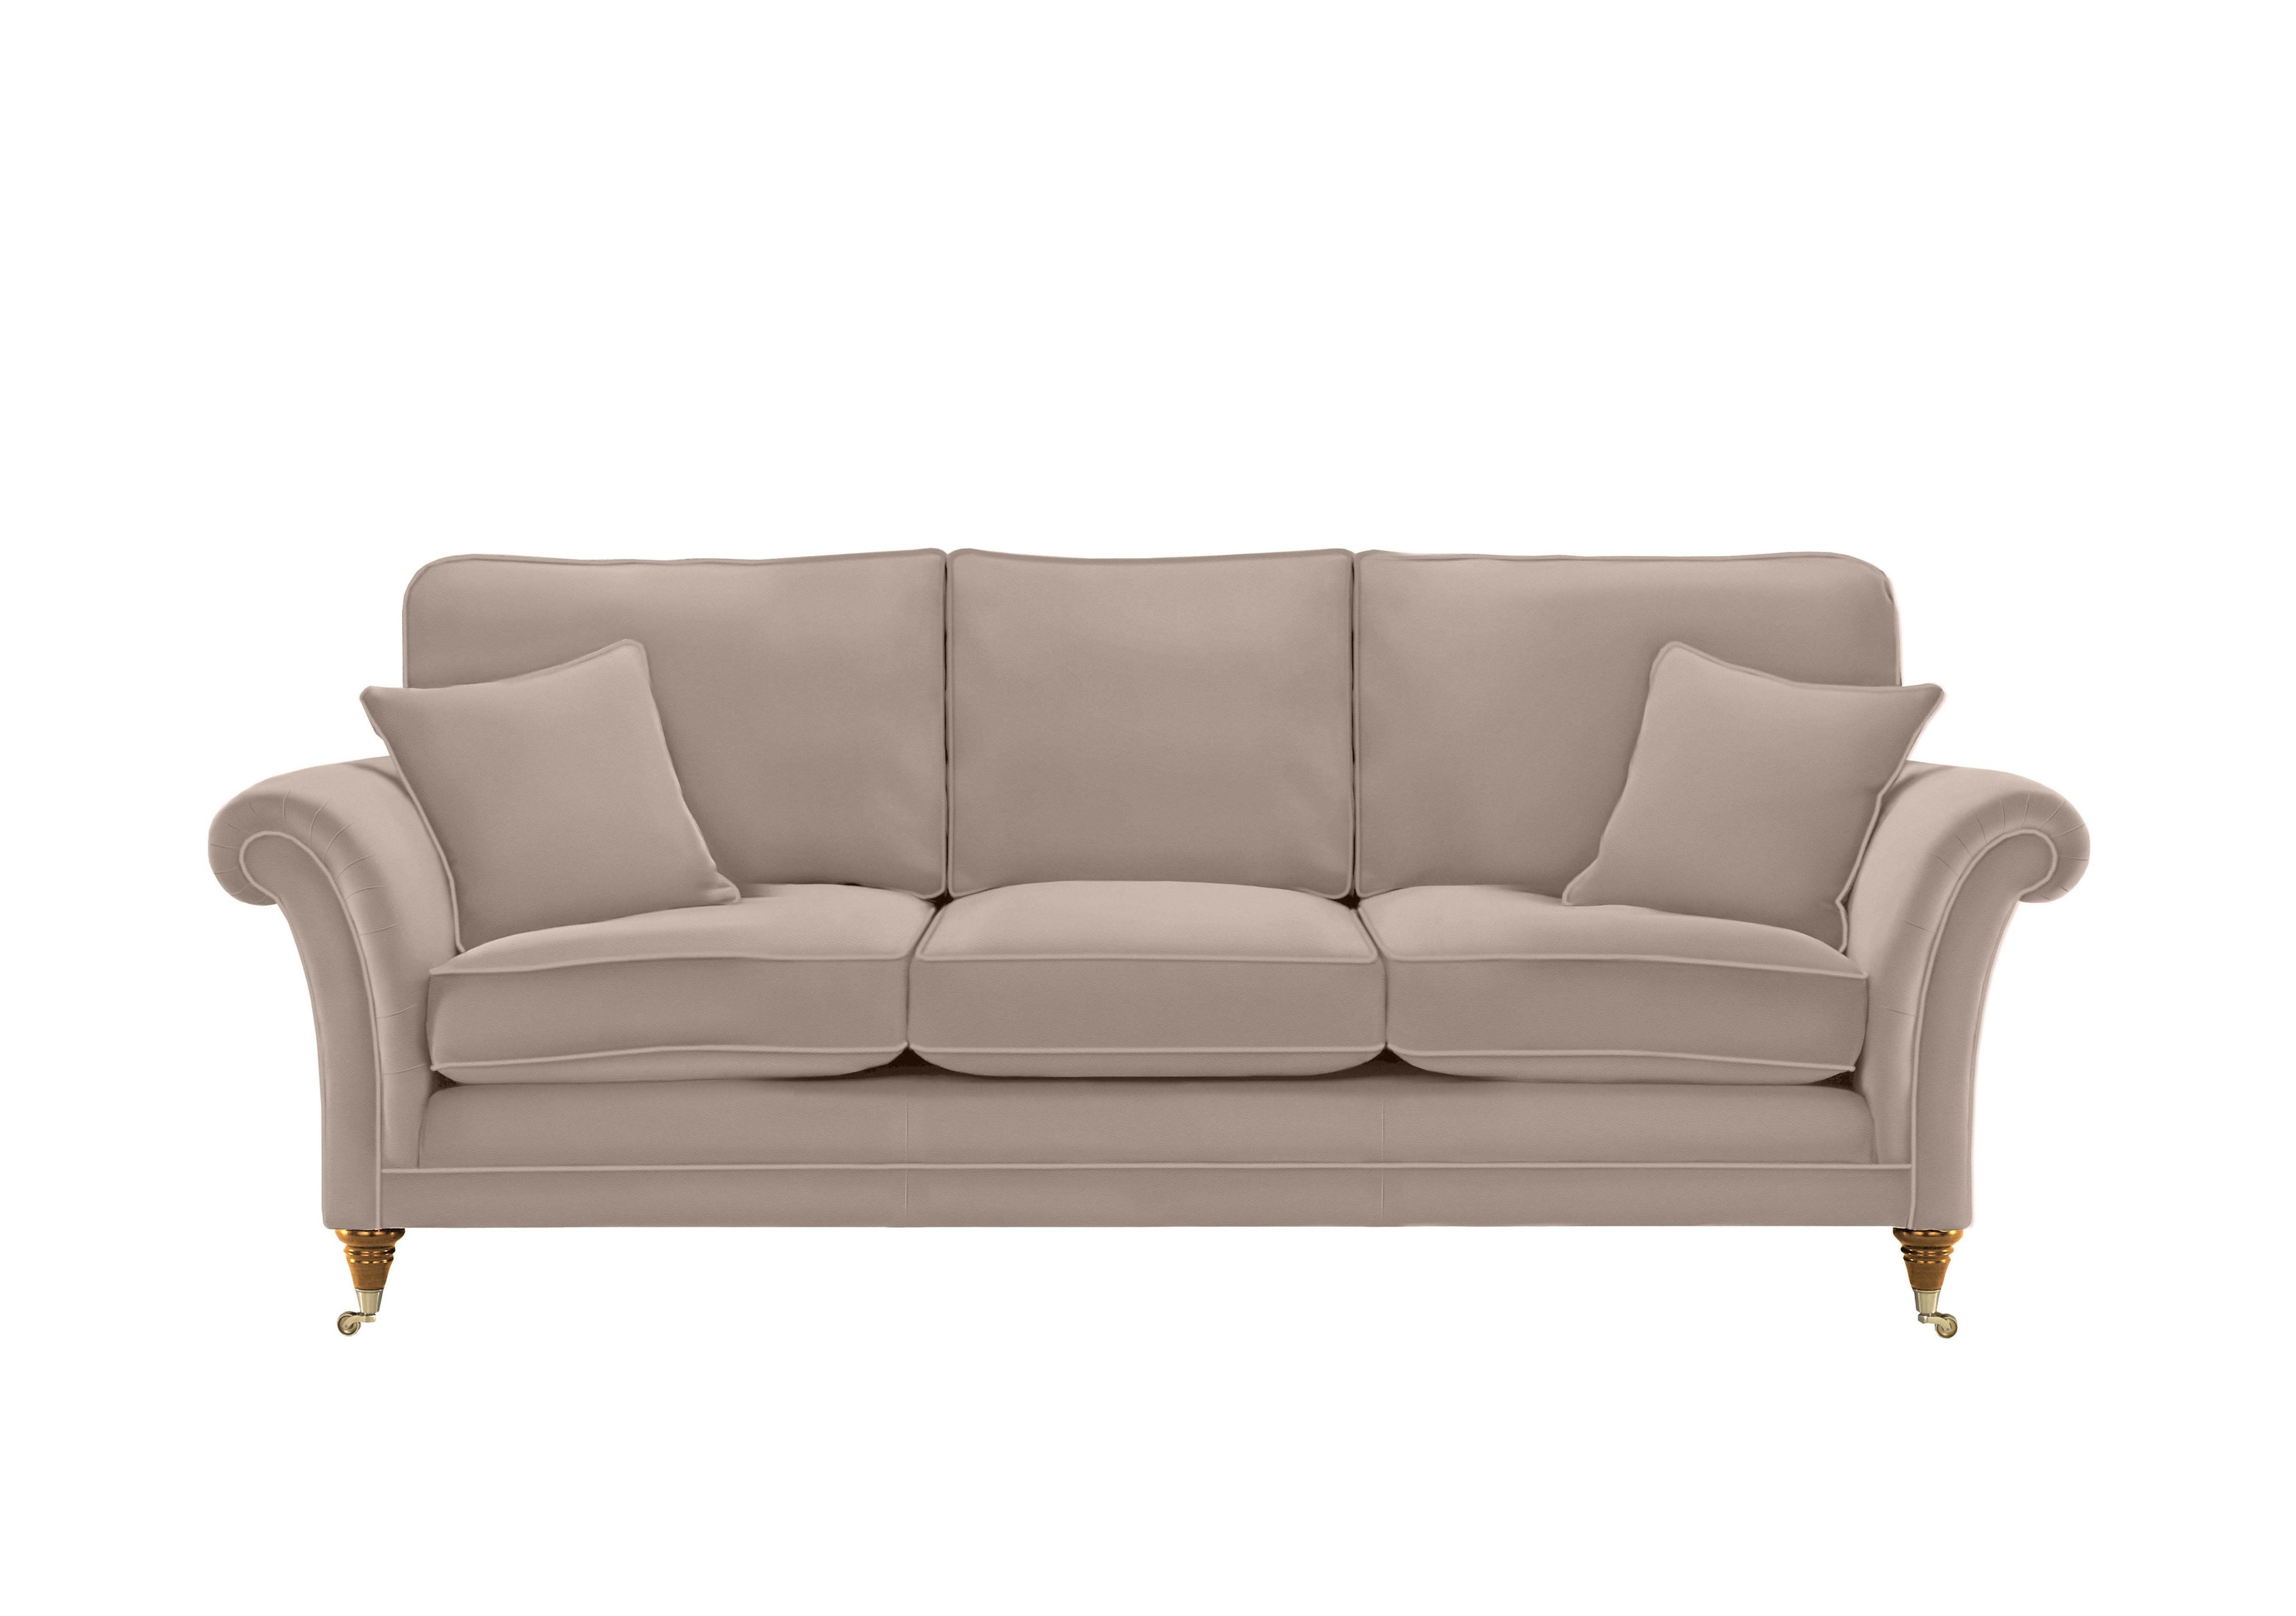 Burghley Grand Leather Sofa in 009019-0056 Roma Putty on Furniture Village